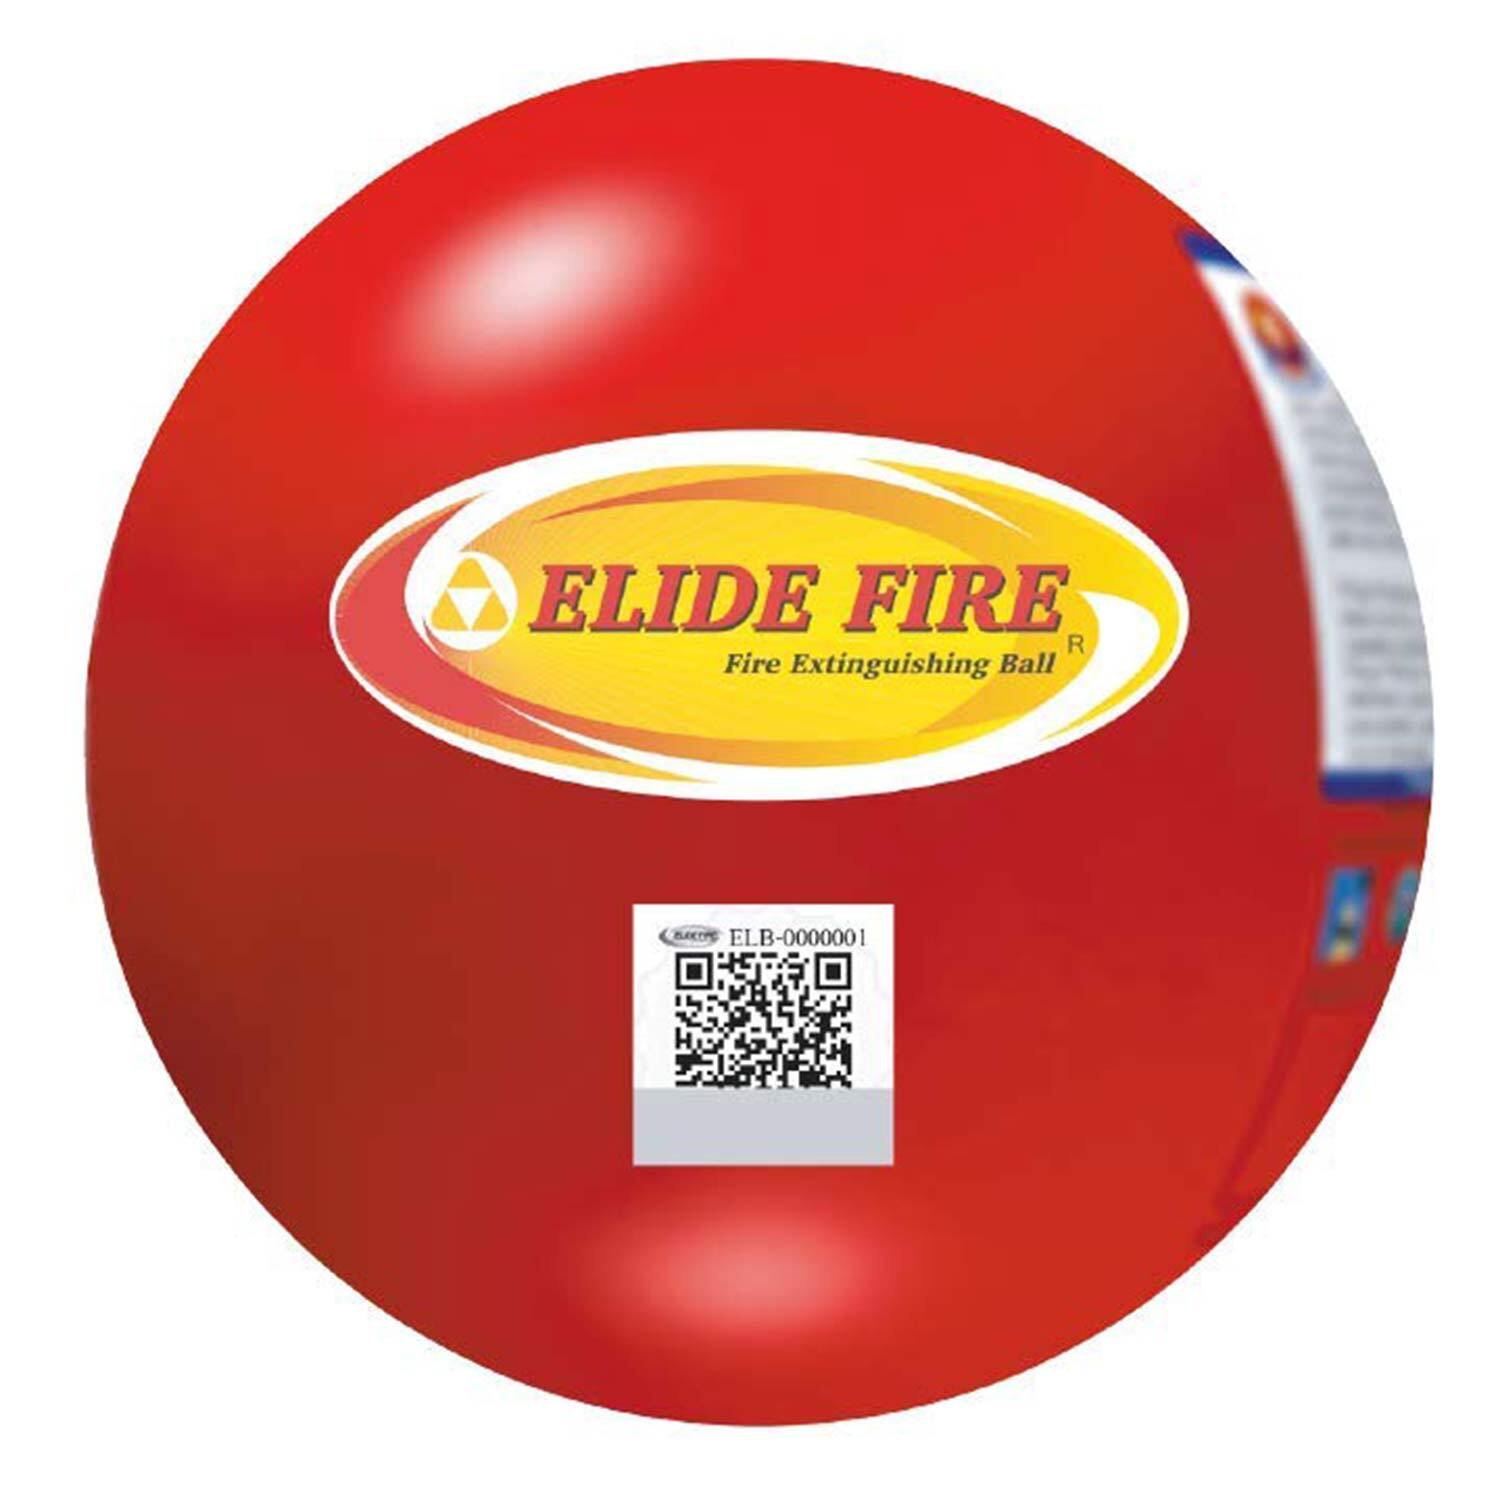 4-elide-fire-ball-fire-extinguisher-industrial-box-package-with-non